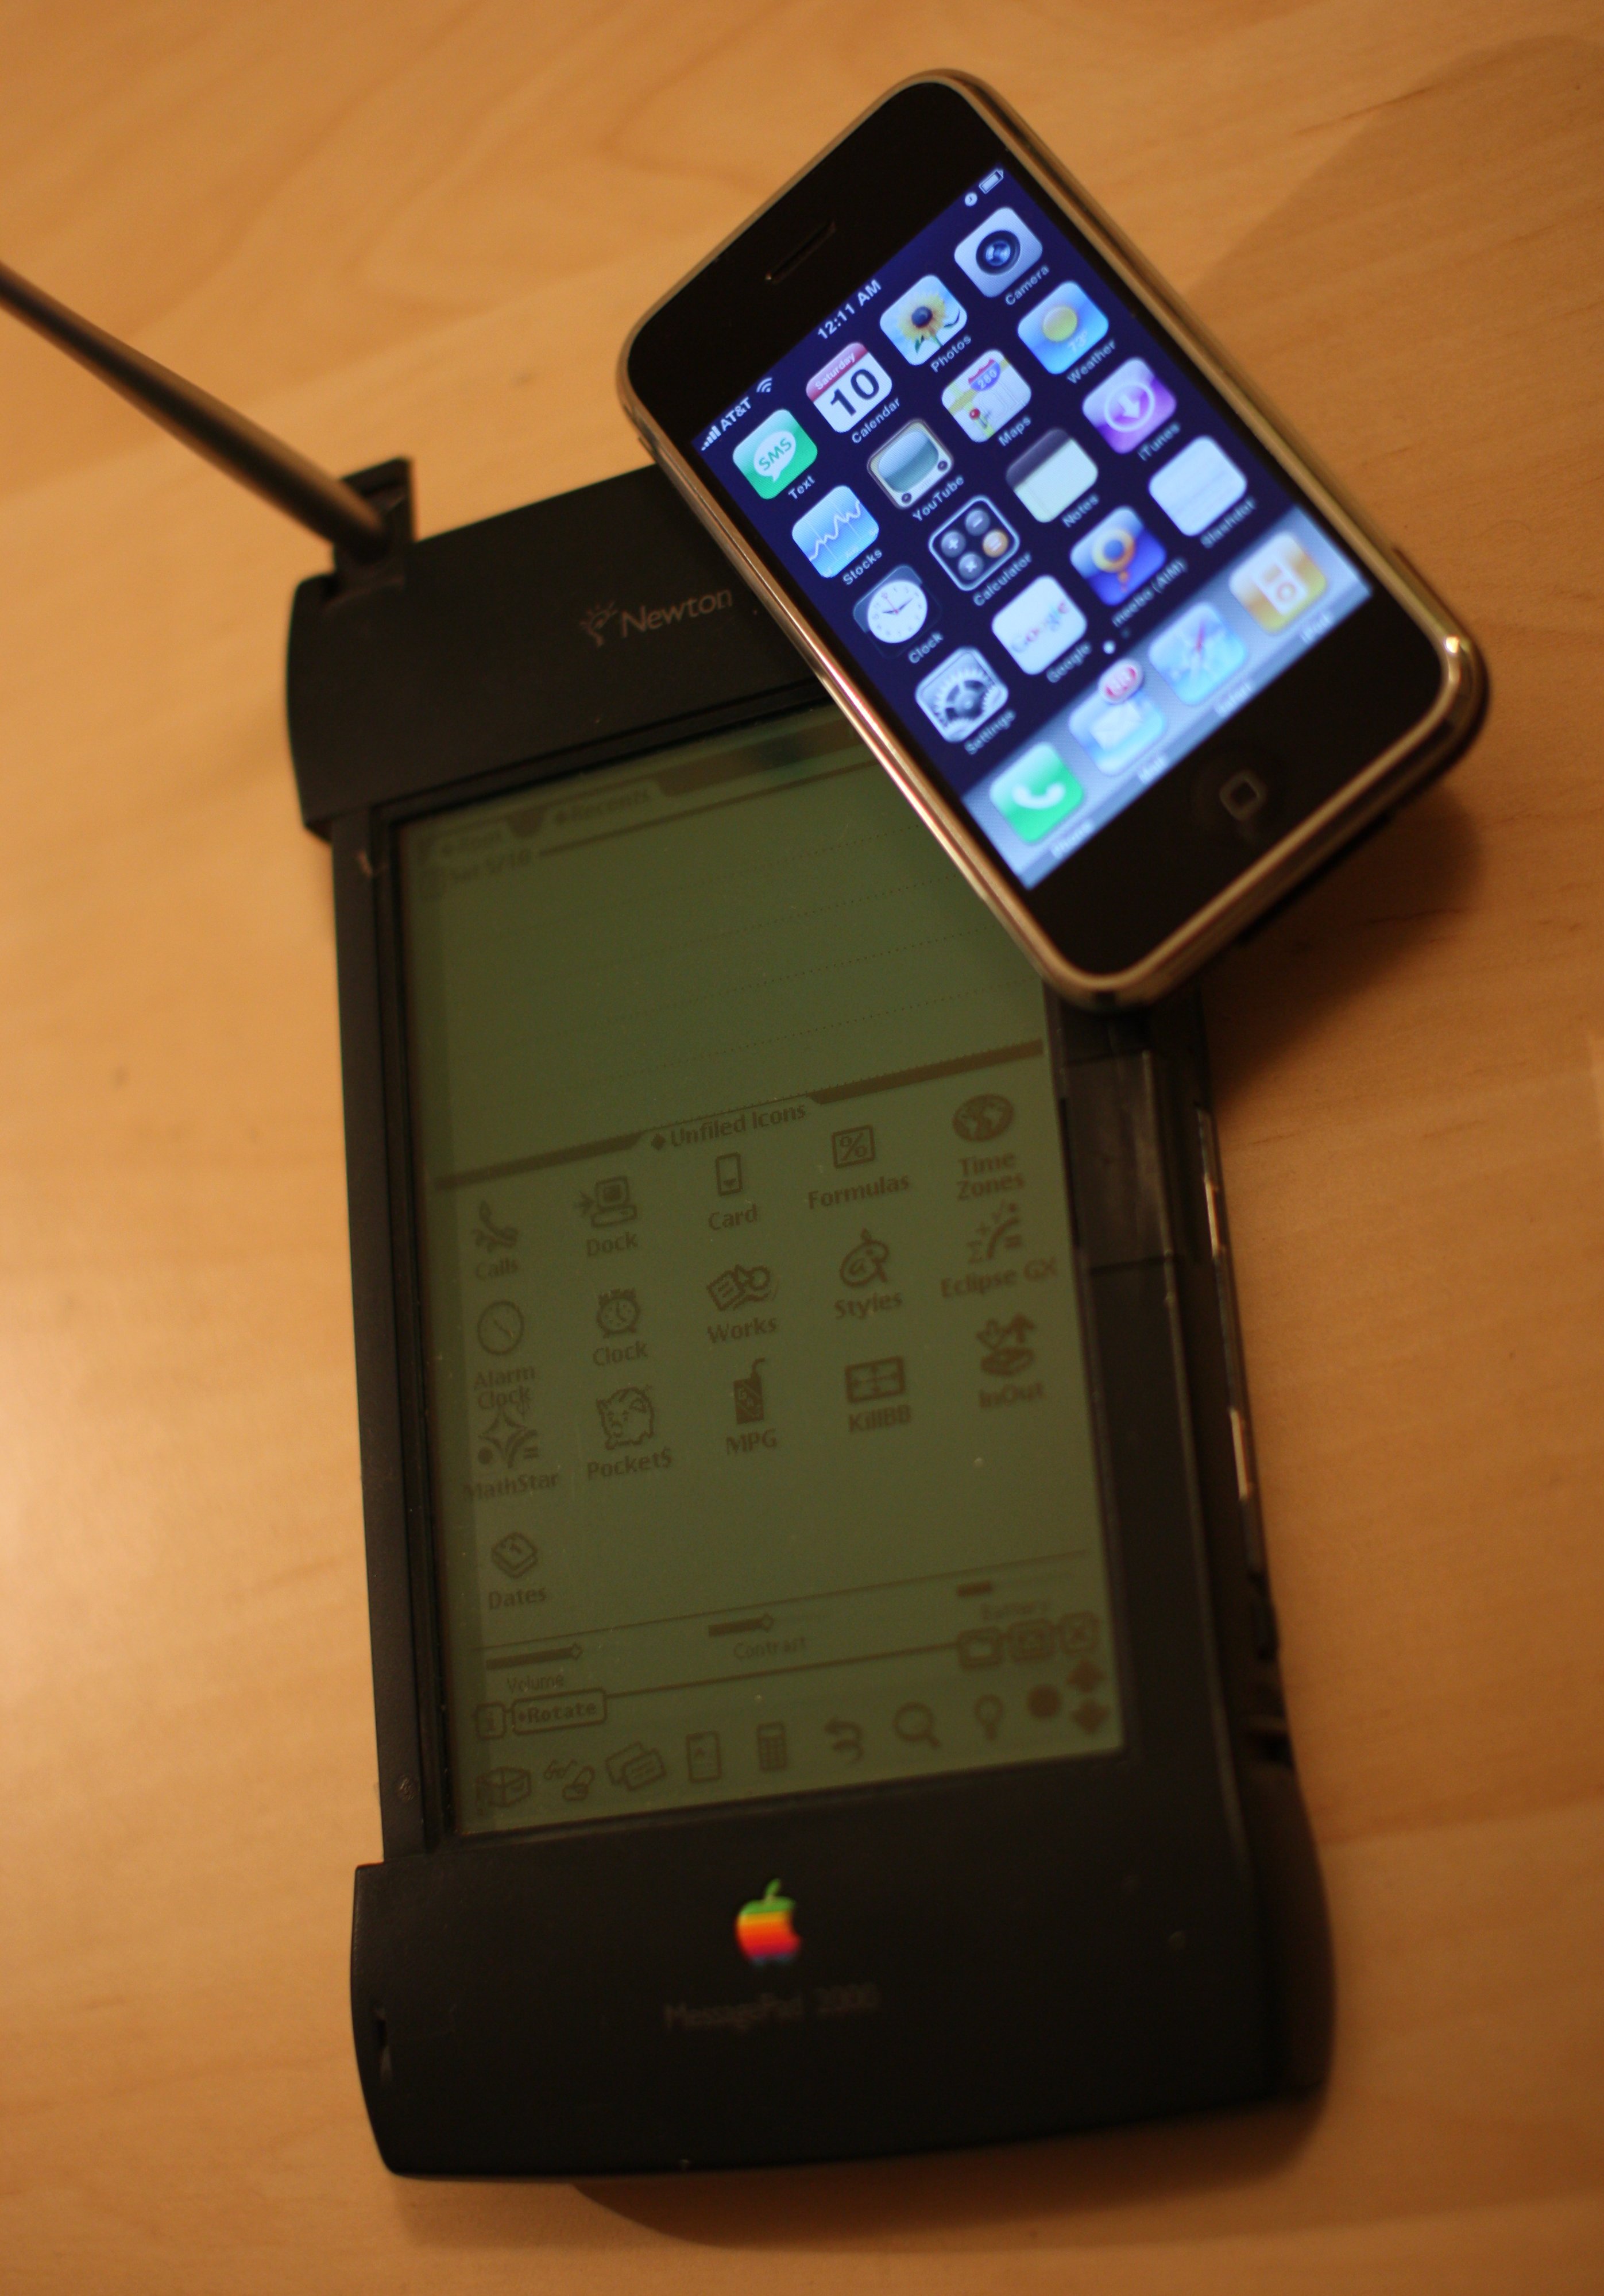 A Newton and an iPhone